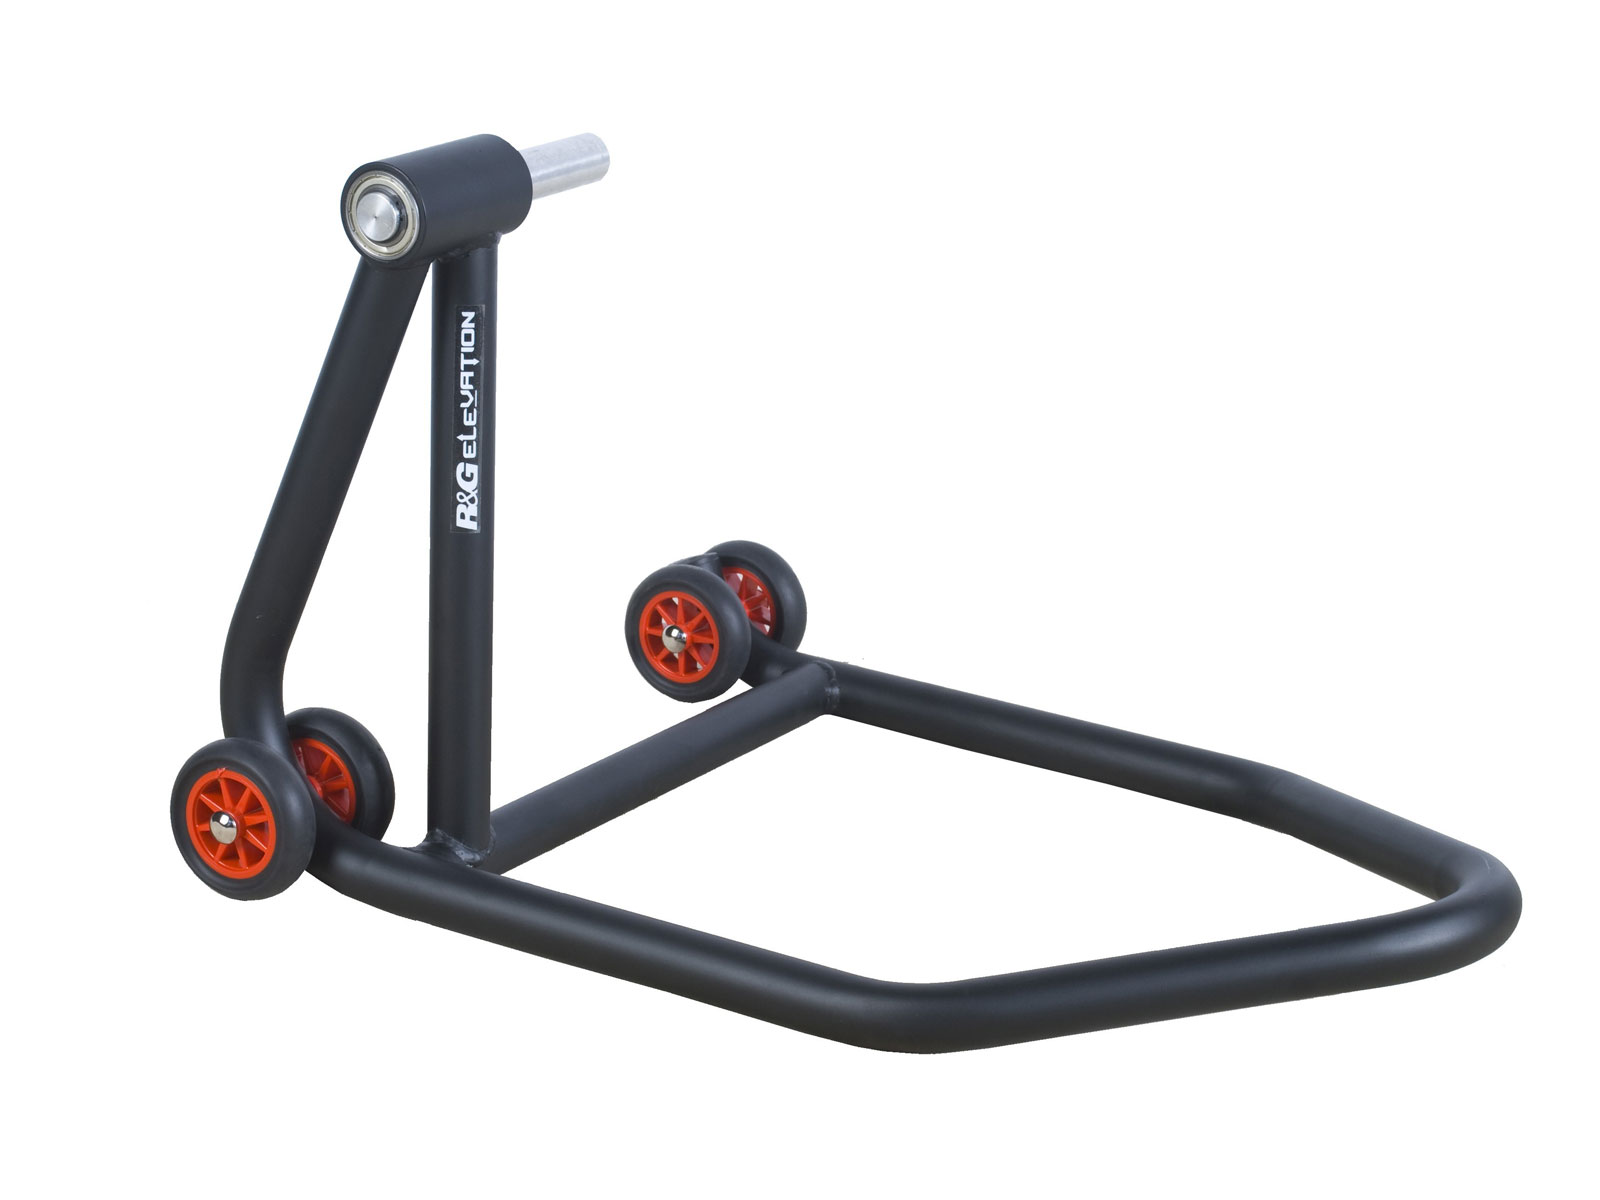 R&G MOTORCYCLE PADDOCK STANDFRONT